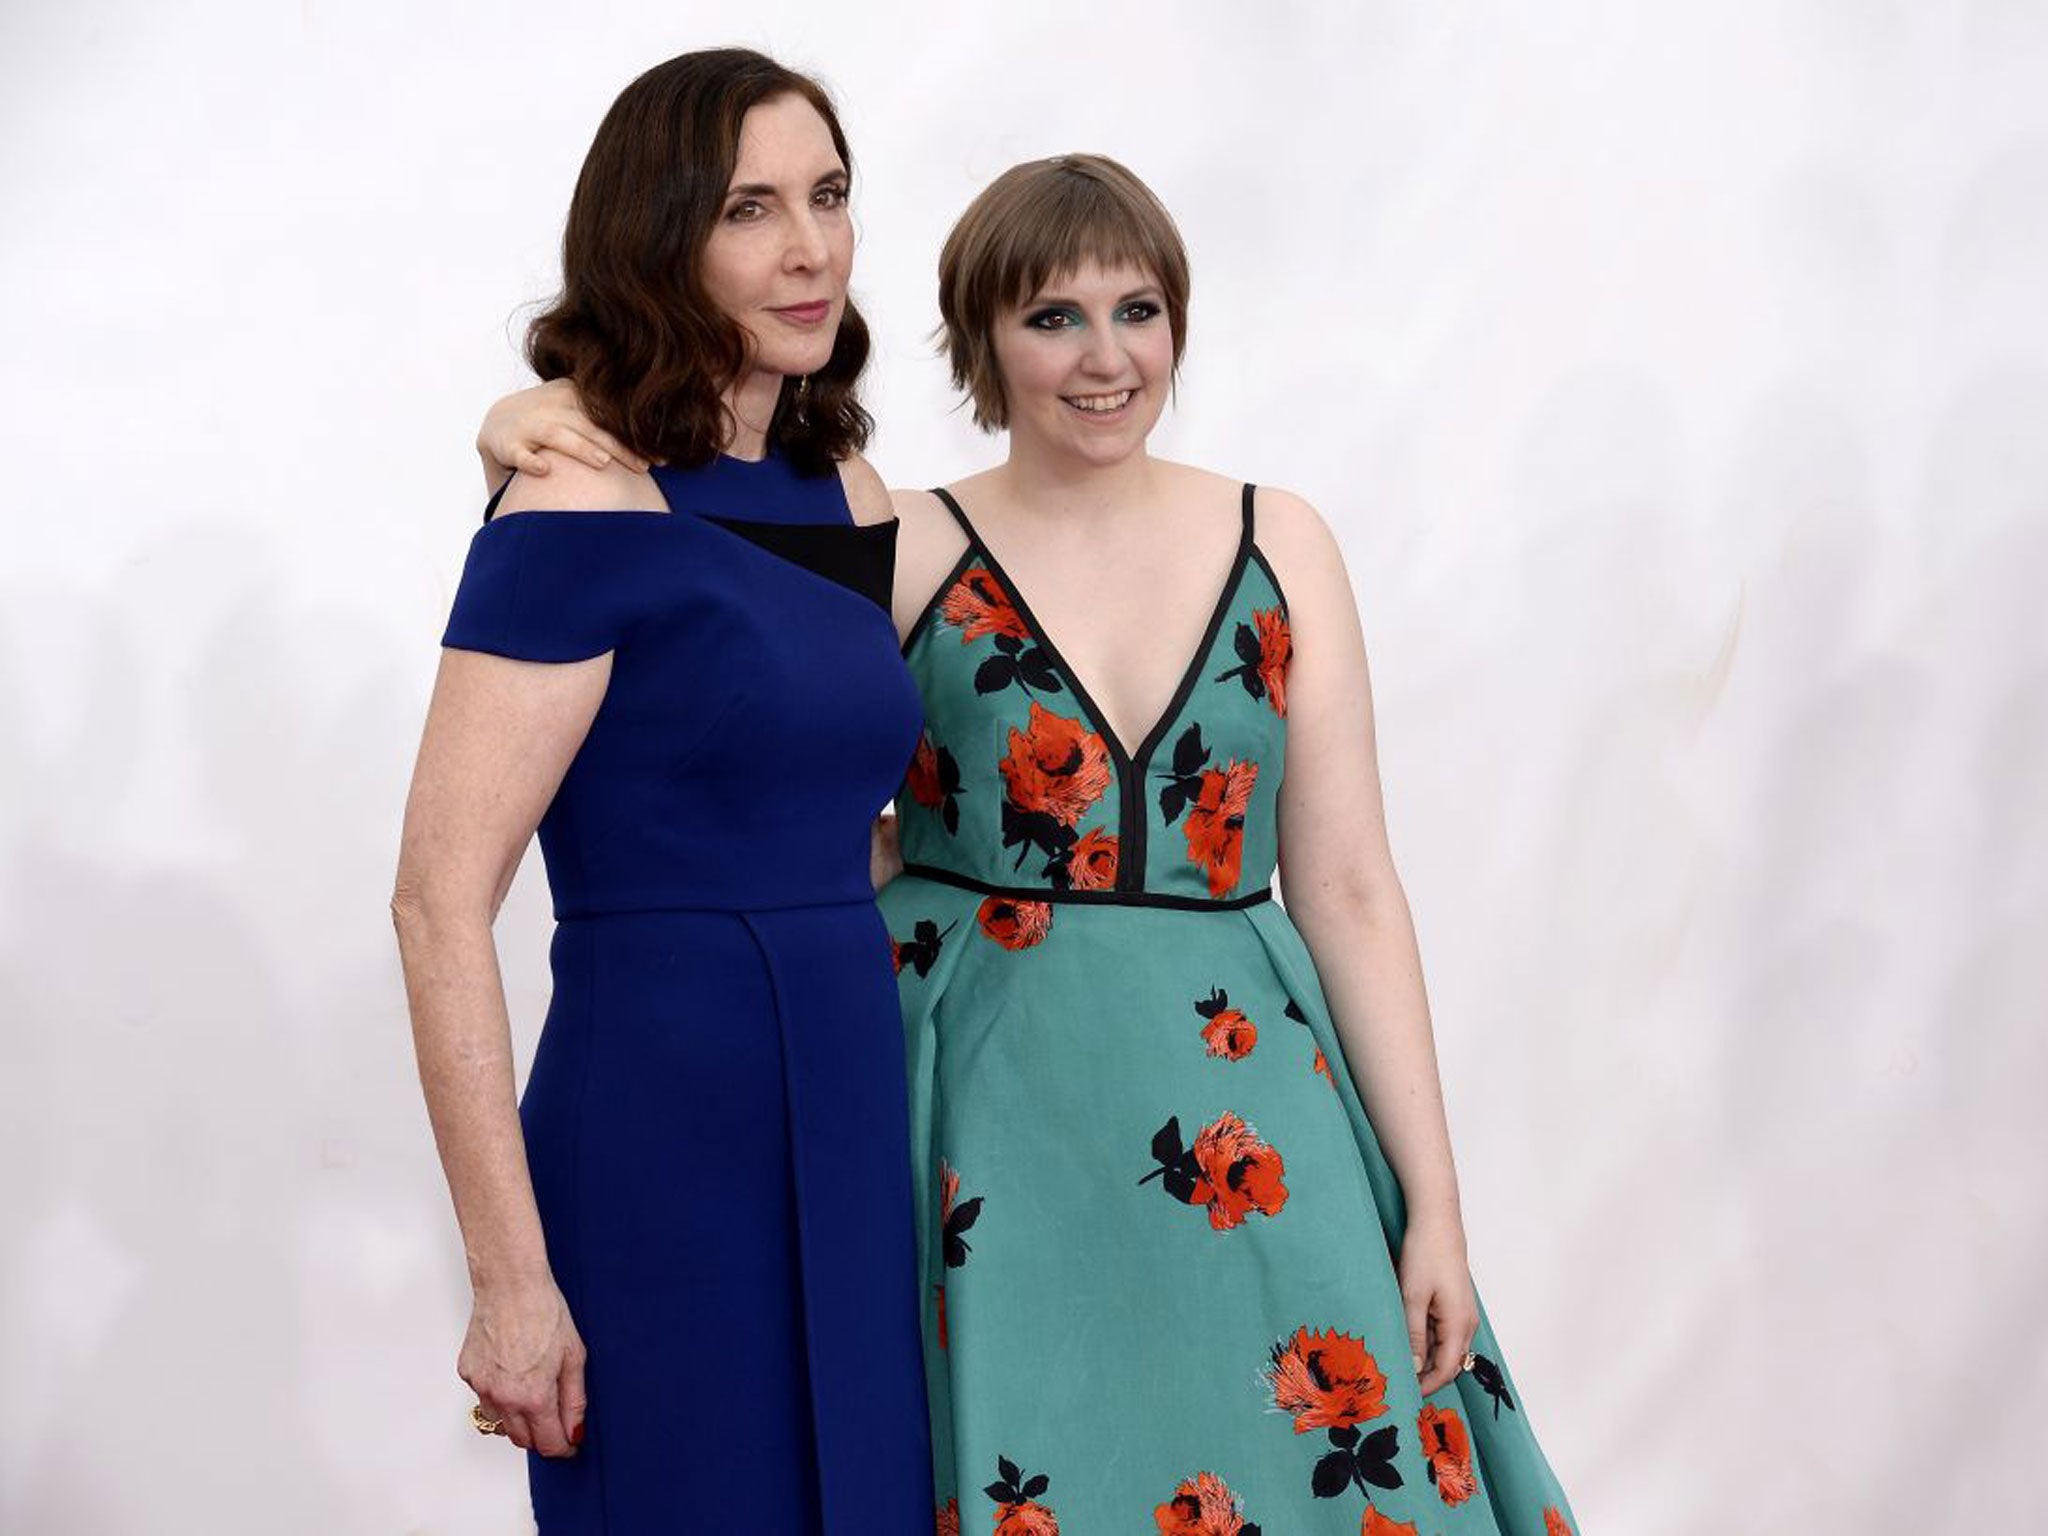 Dolled up: Simmons with her daughter Lena Dunham